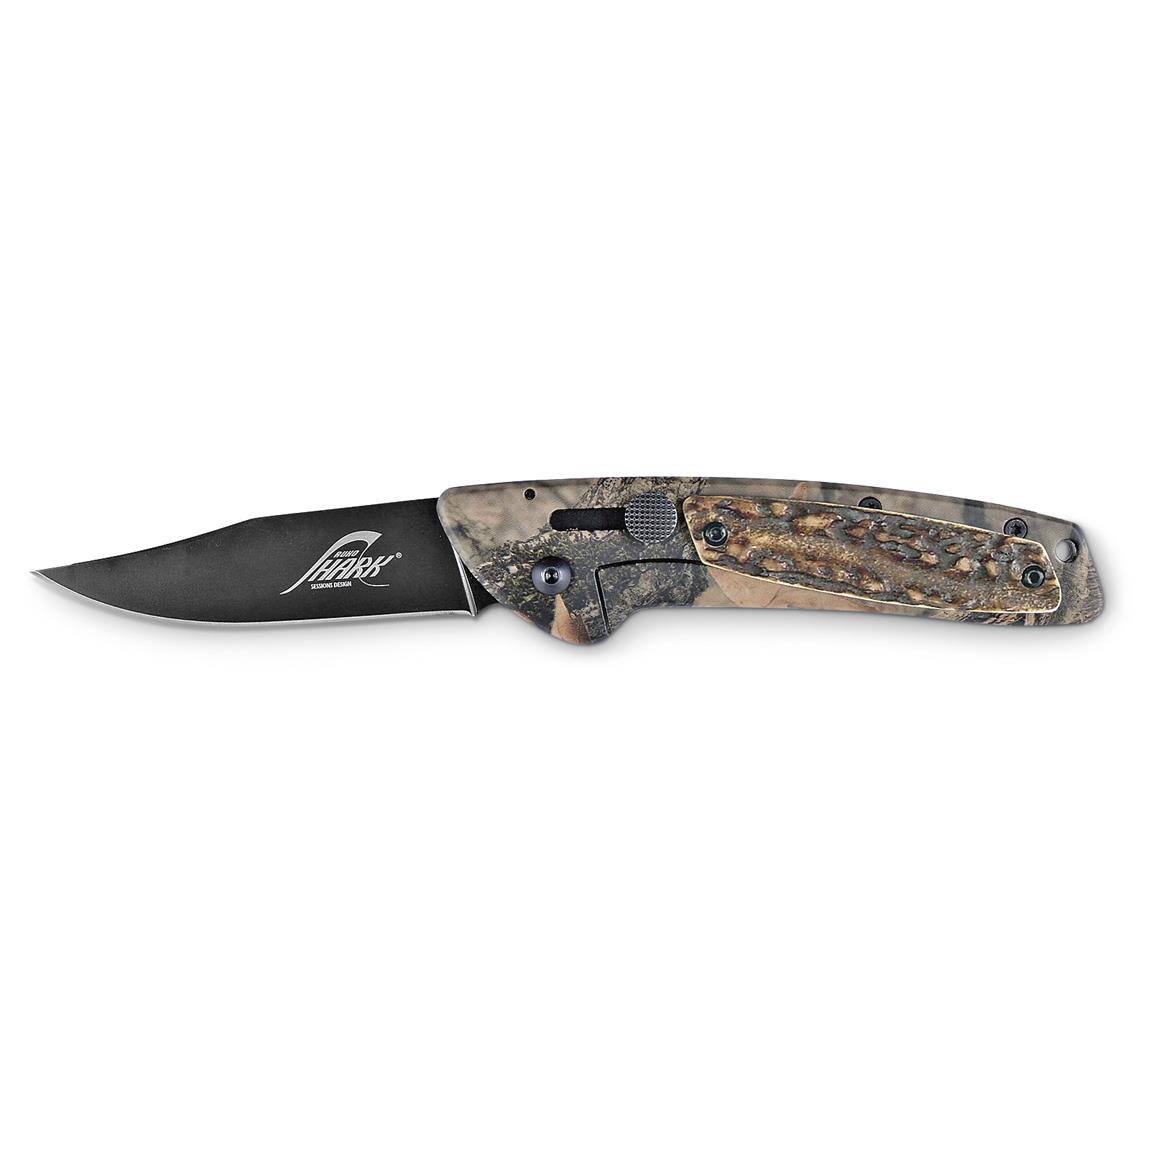 RUKO Shark Lever Action Manual-assist Folding Knife, Camo / Stag